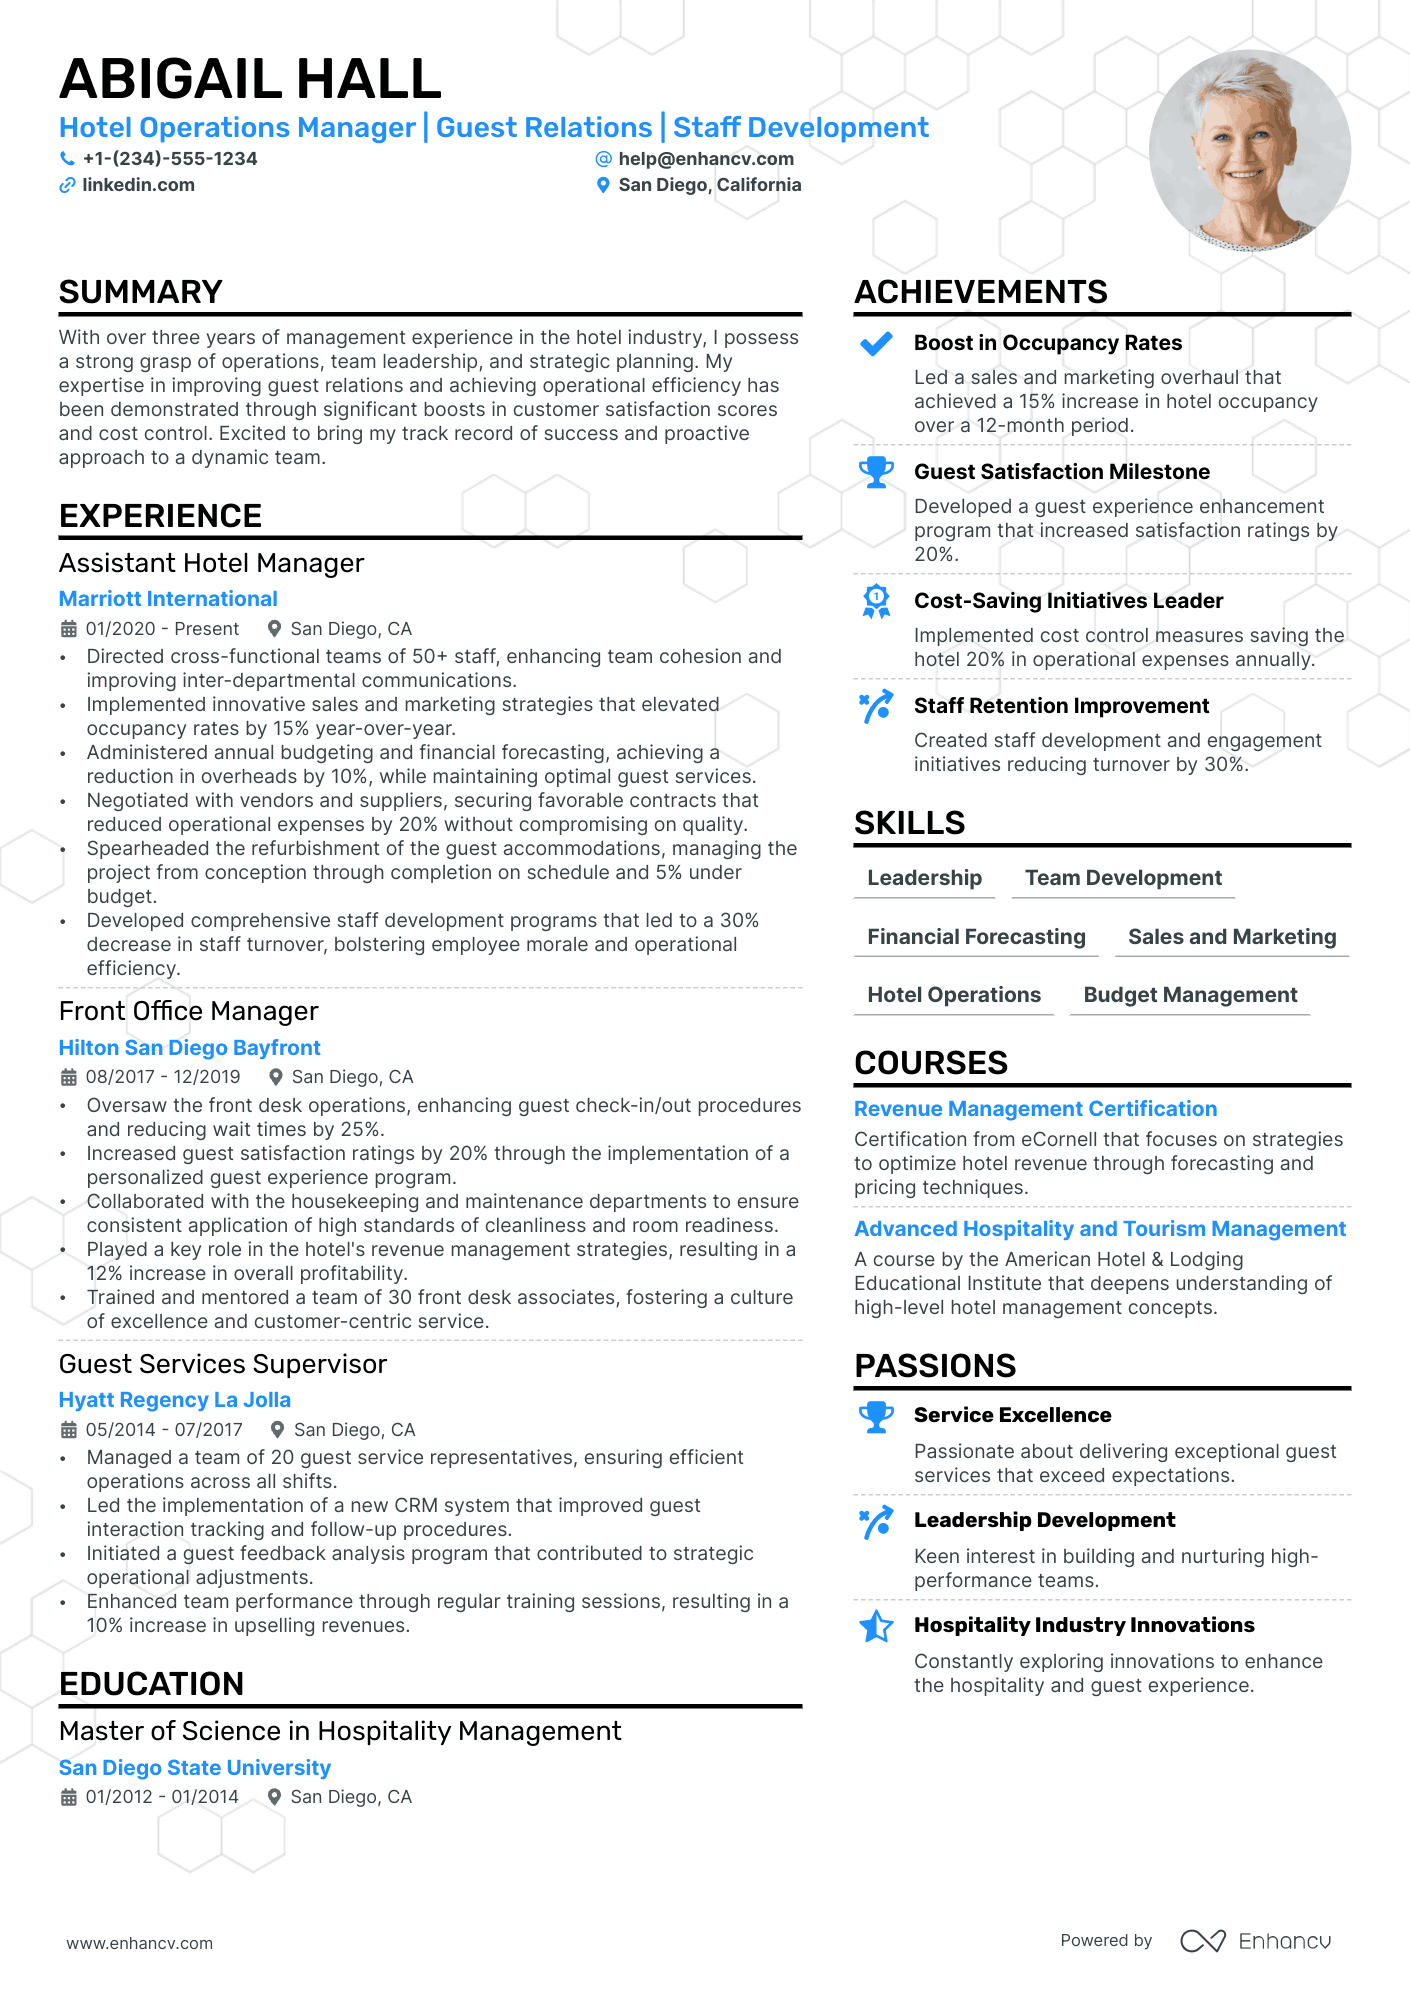 Hotel Operations Manager resume example